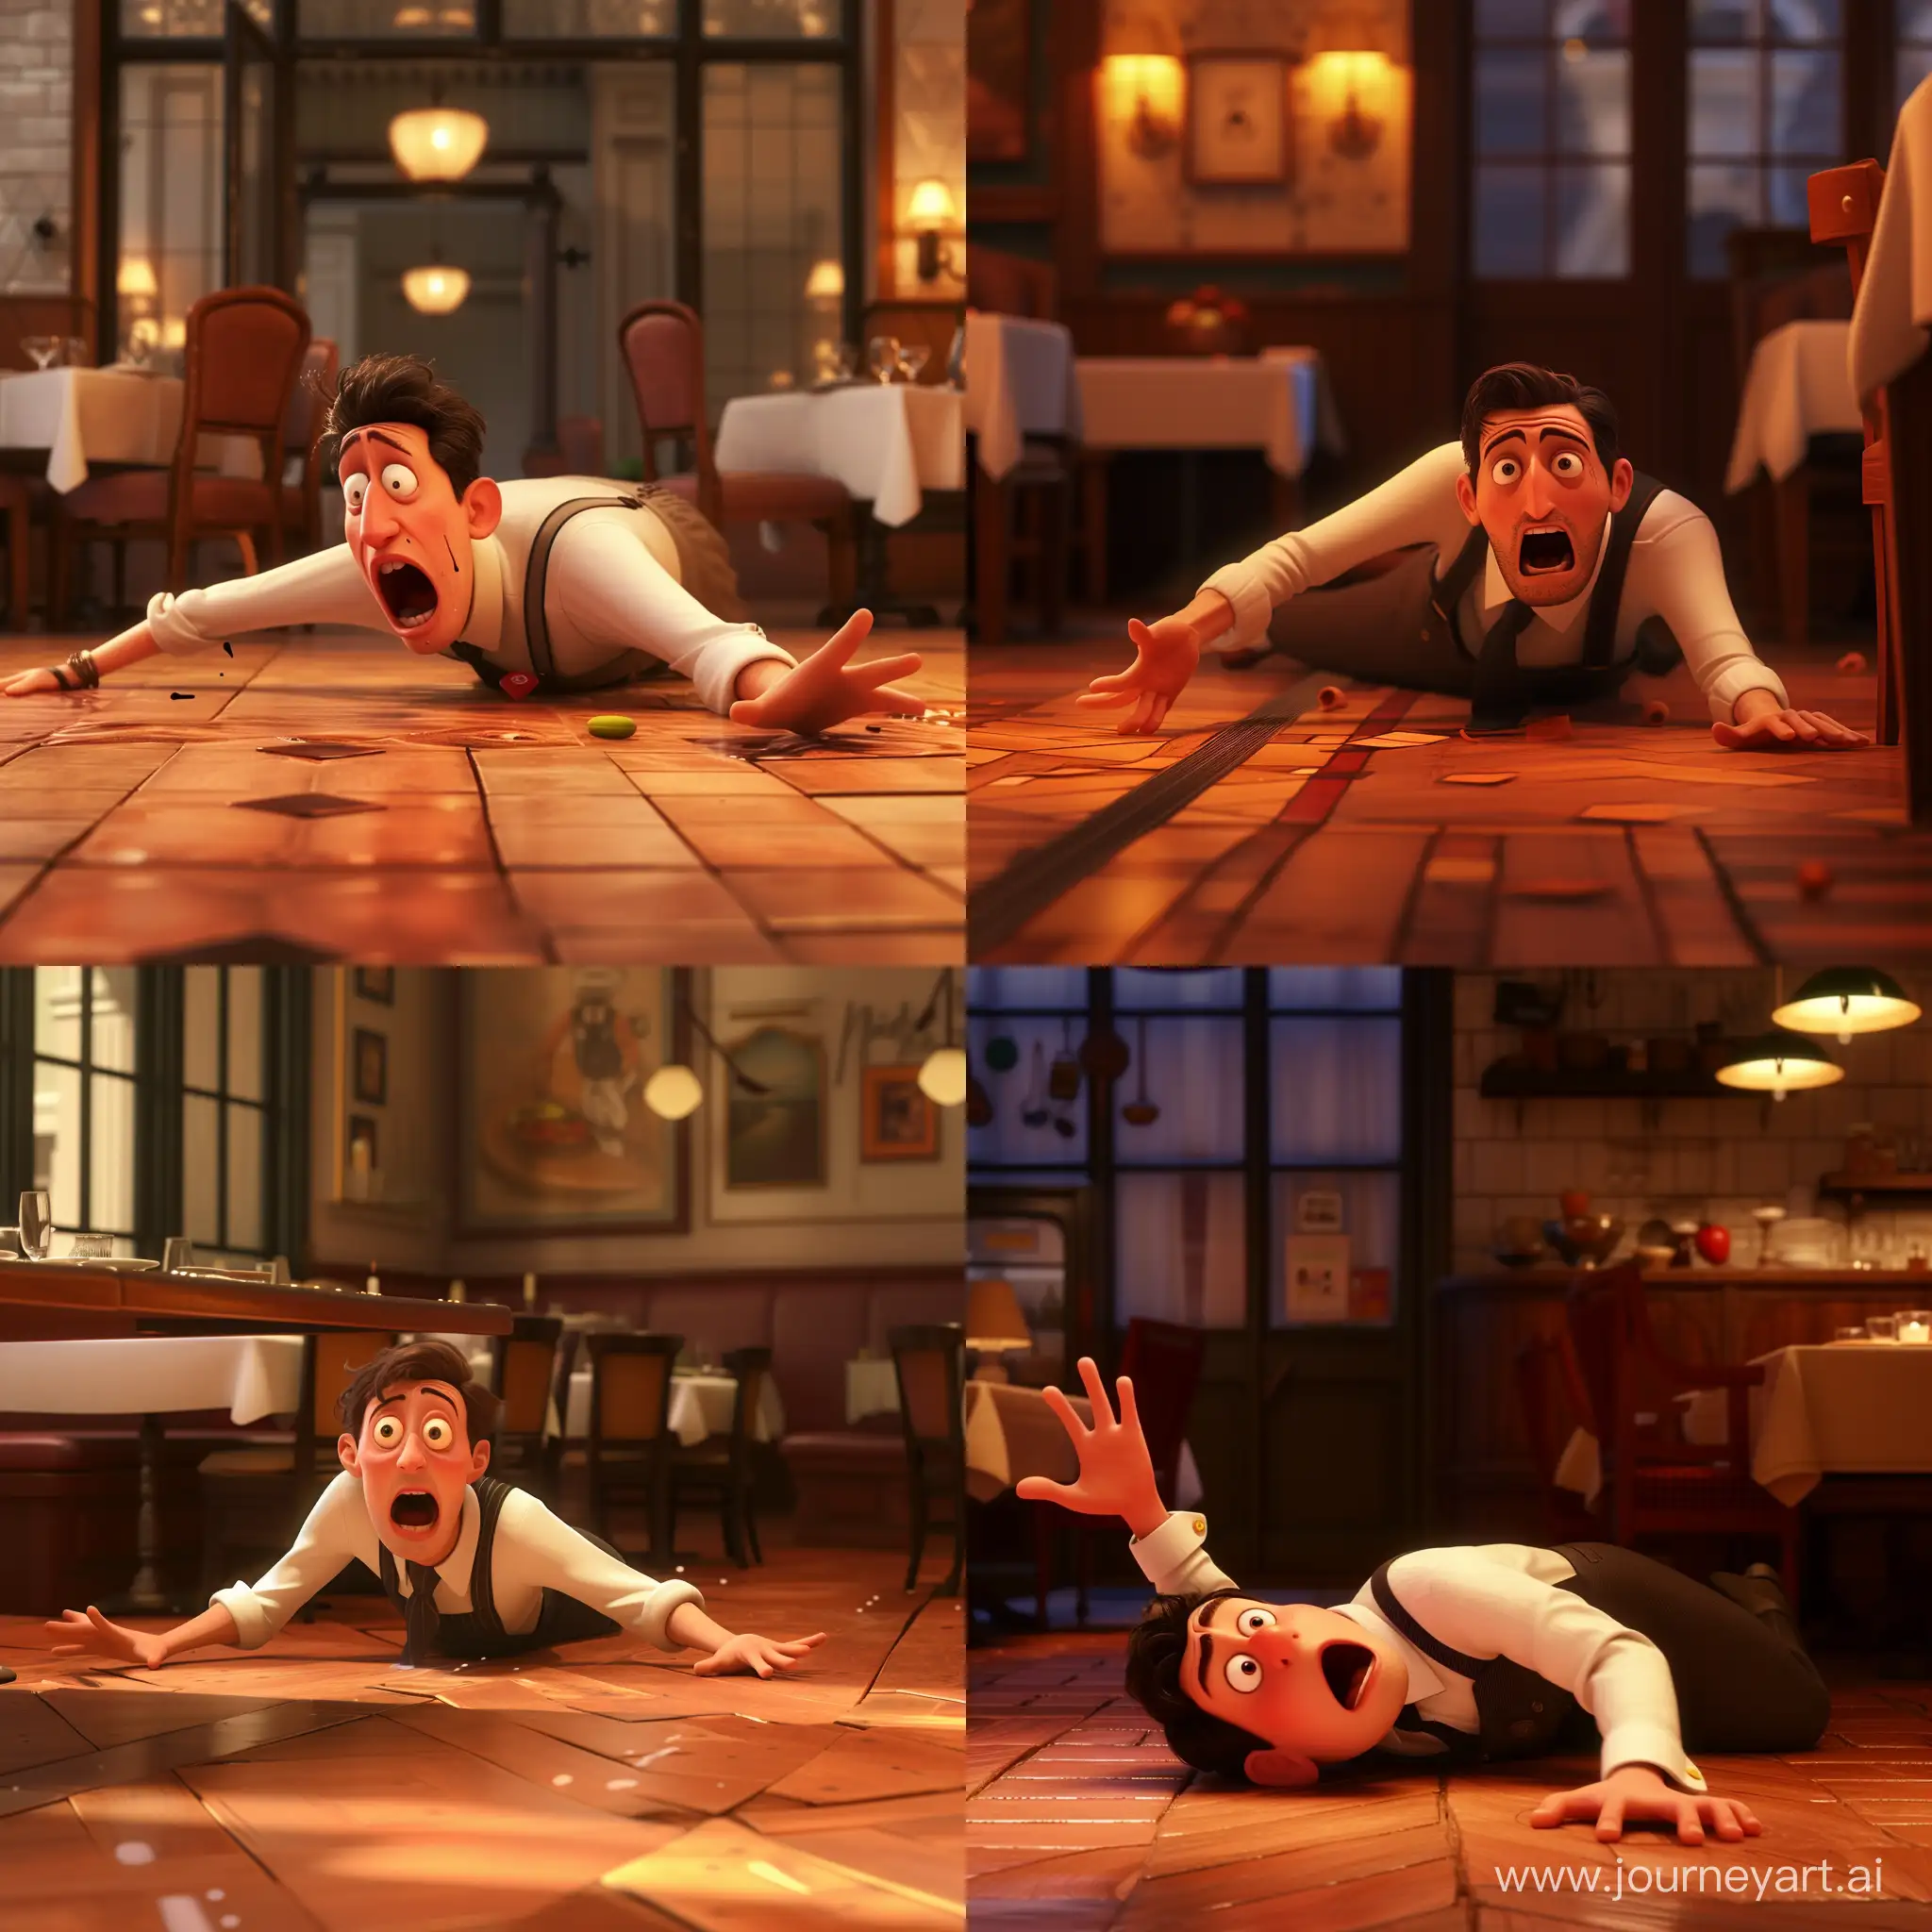 a lone waiter, tired of work, lying on the ground stretches his hand across the table, screams, he looks very tired, Pixar style